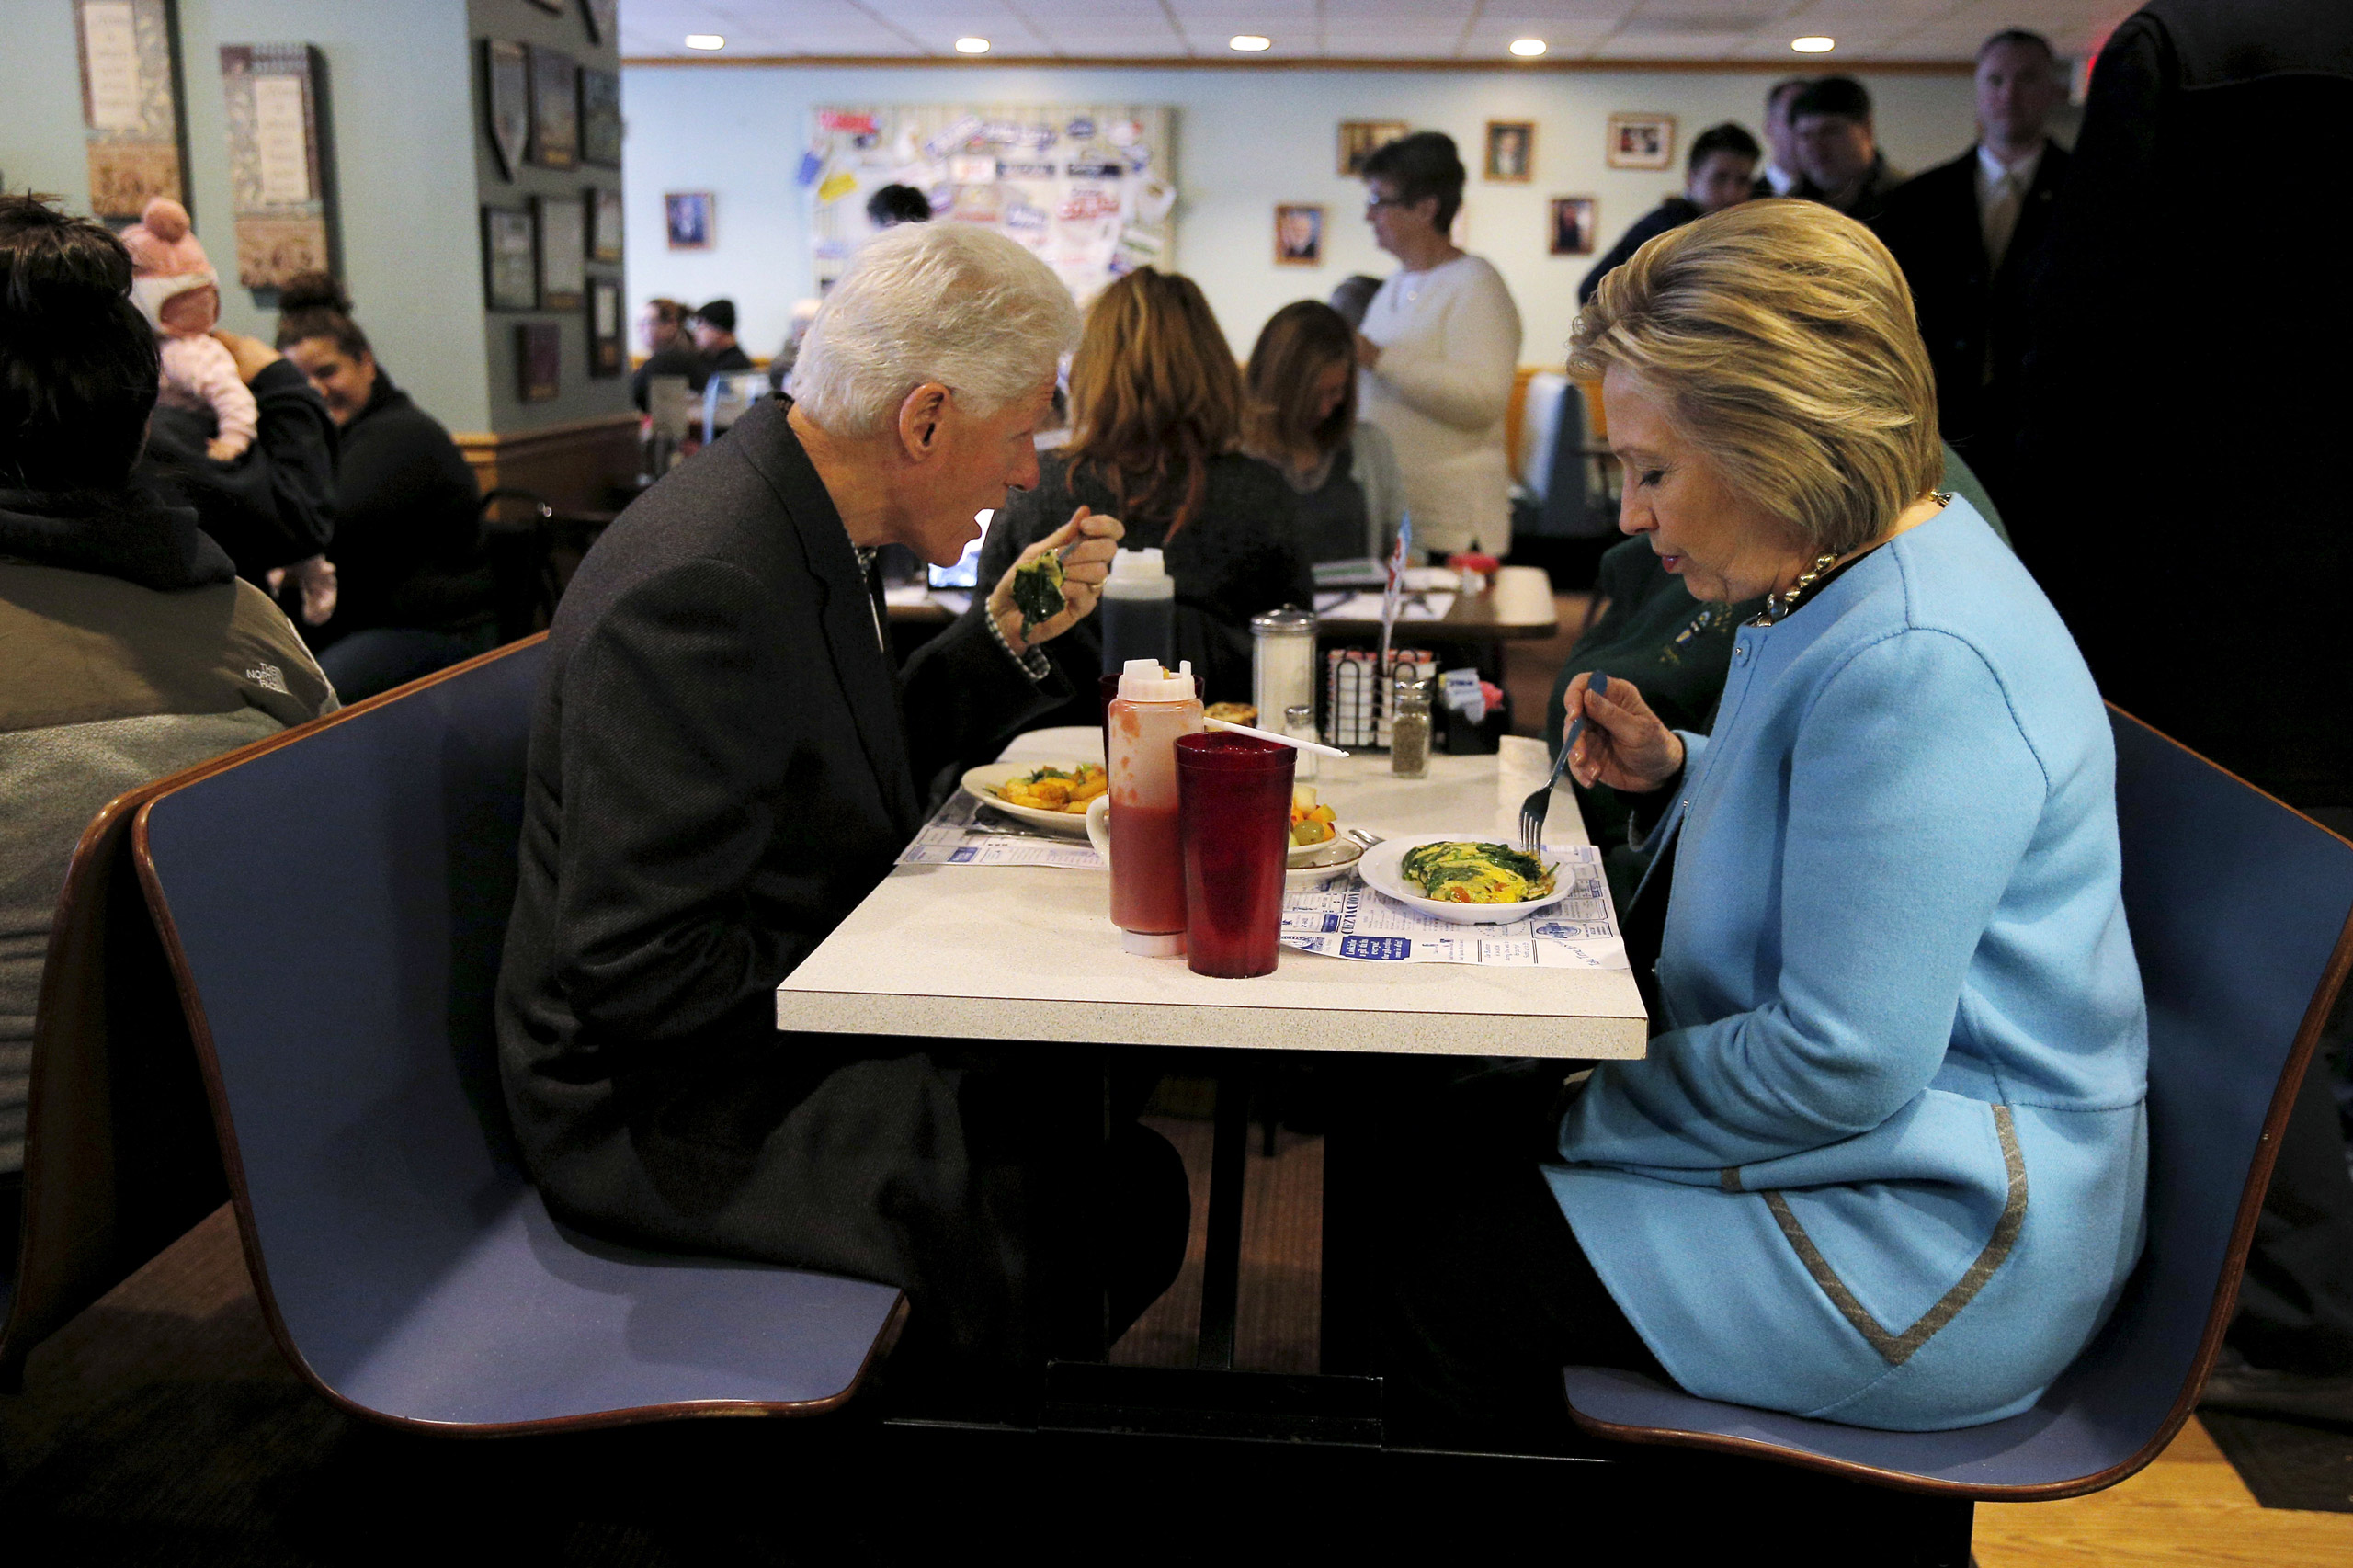 Democratic presidential candidate Hillary Clinton and her husband, former President Bill Clinton eat breakfast at the Chez Vachon restaurant in Manchester, N.H., on Febr. 8, 2016. (Brian Snyder—Reuters)